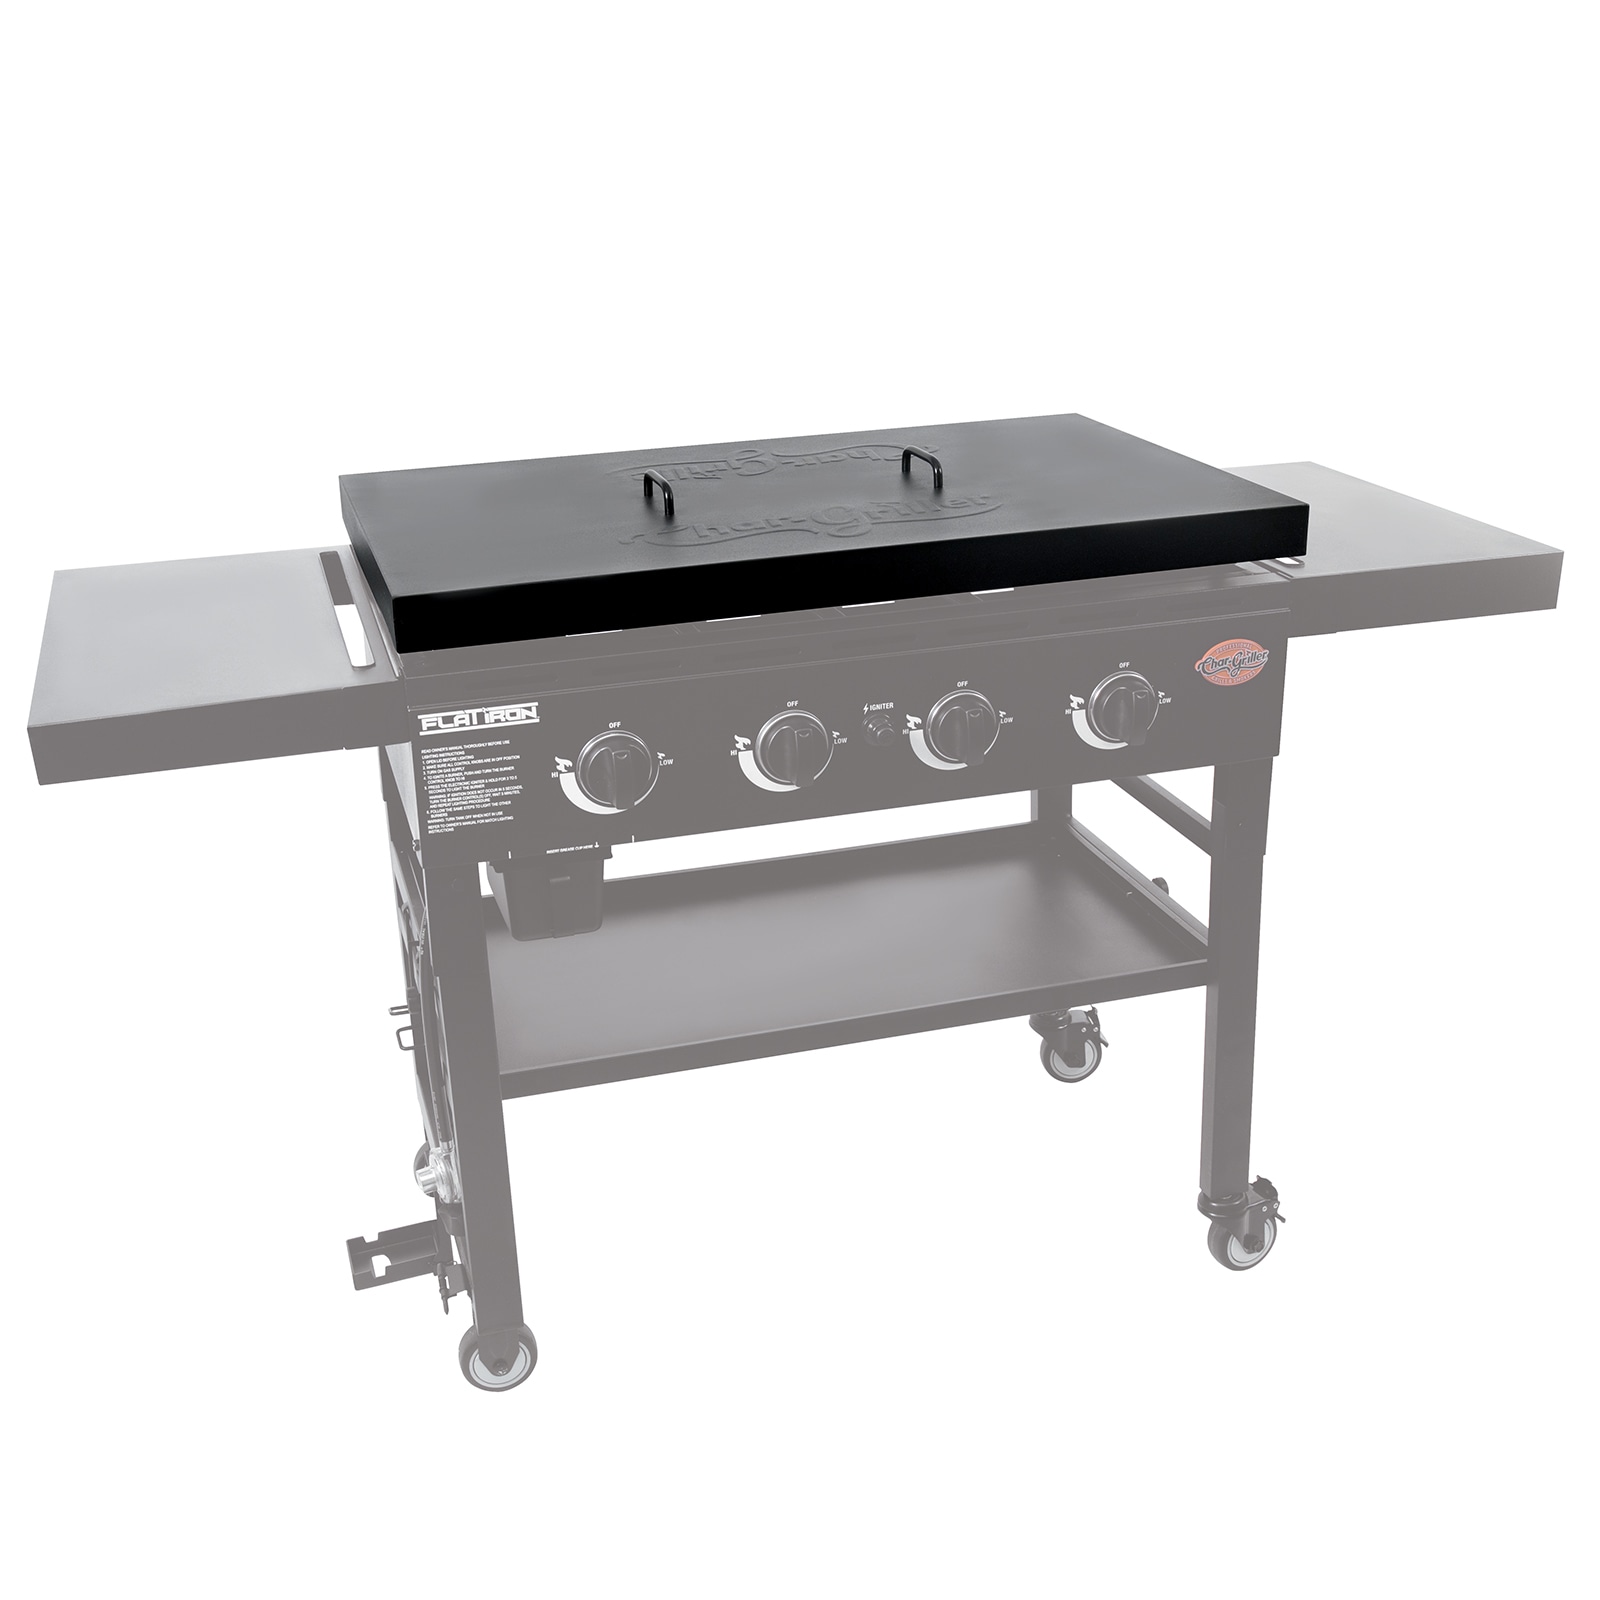 Utheer 25 x 16 Flat Top Cooking Griddle, 304 Stainless Steel Griddle Grill  with Retractable Stand Accommodates Different Size of Grill, Stove Top  Griddle for Weber, Charbroil, Nexgrill Gas Grill